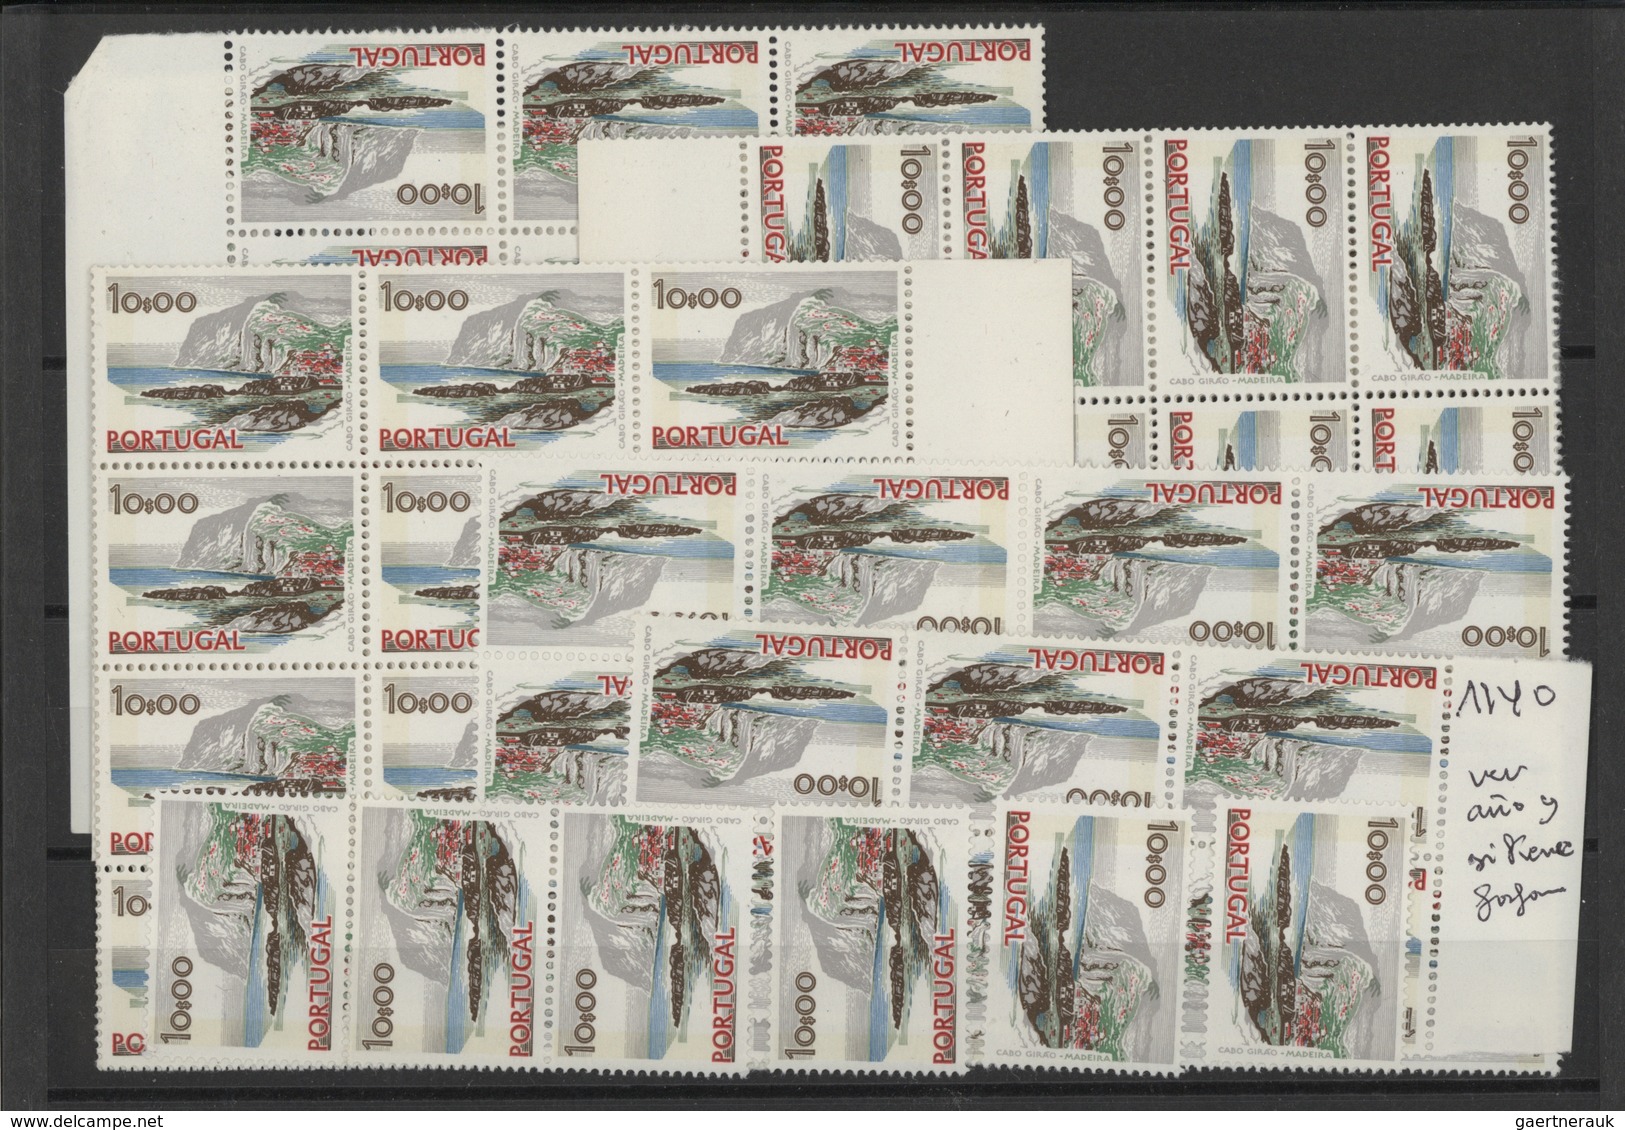 Portugal: 1928/1980 (ca.), duplicates on stockcards with many complete sets incl. better issues, pho